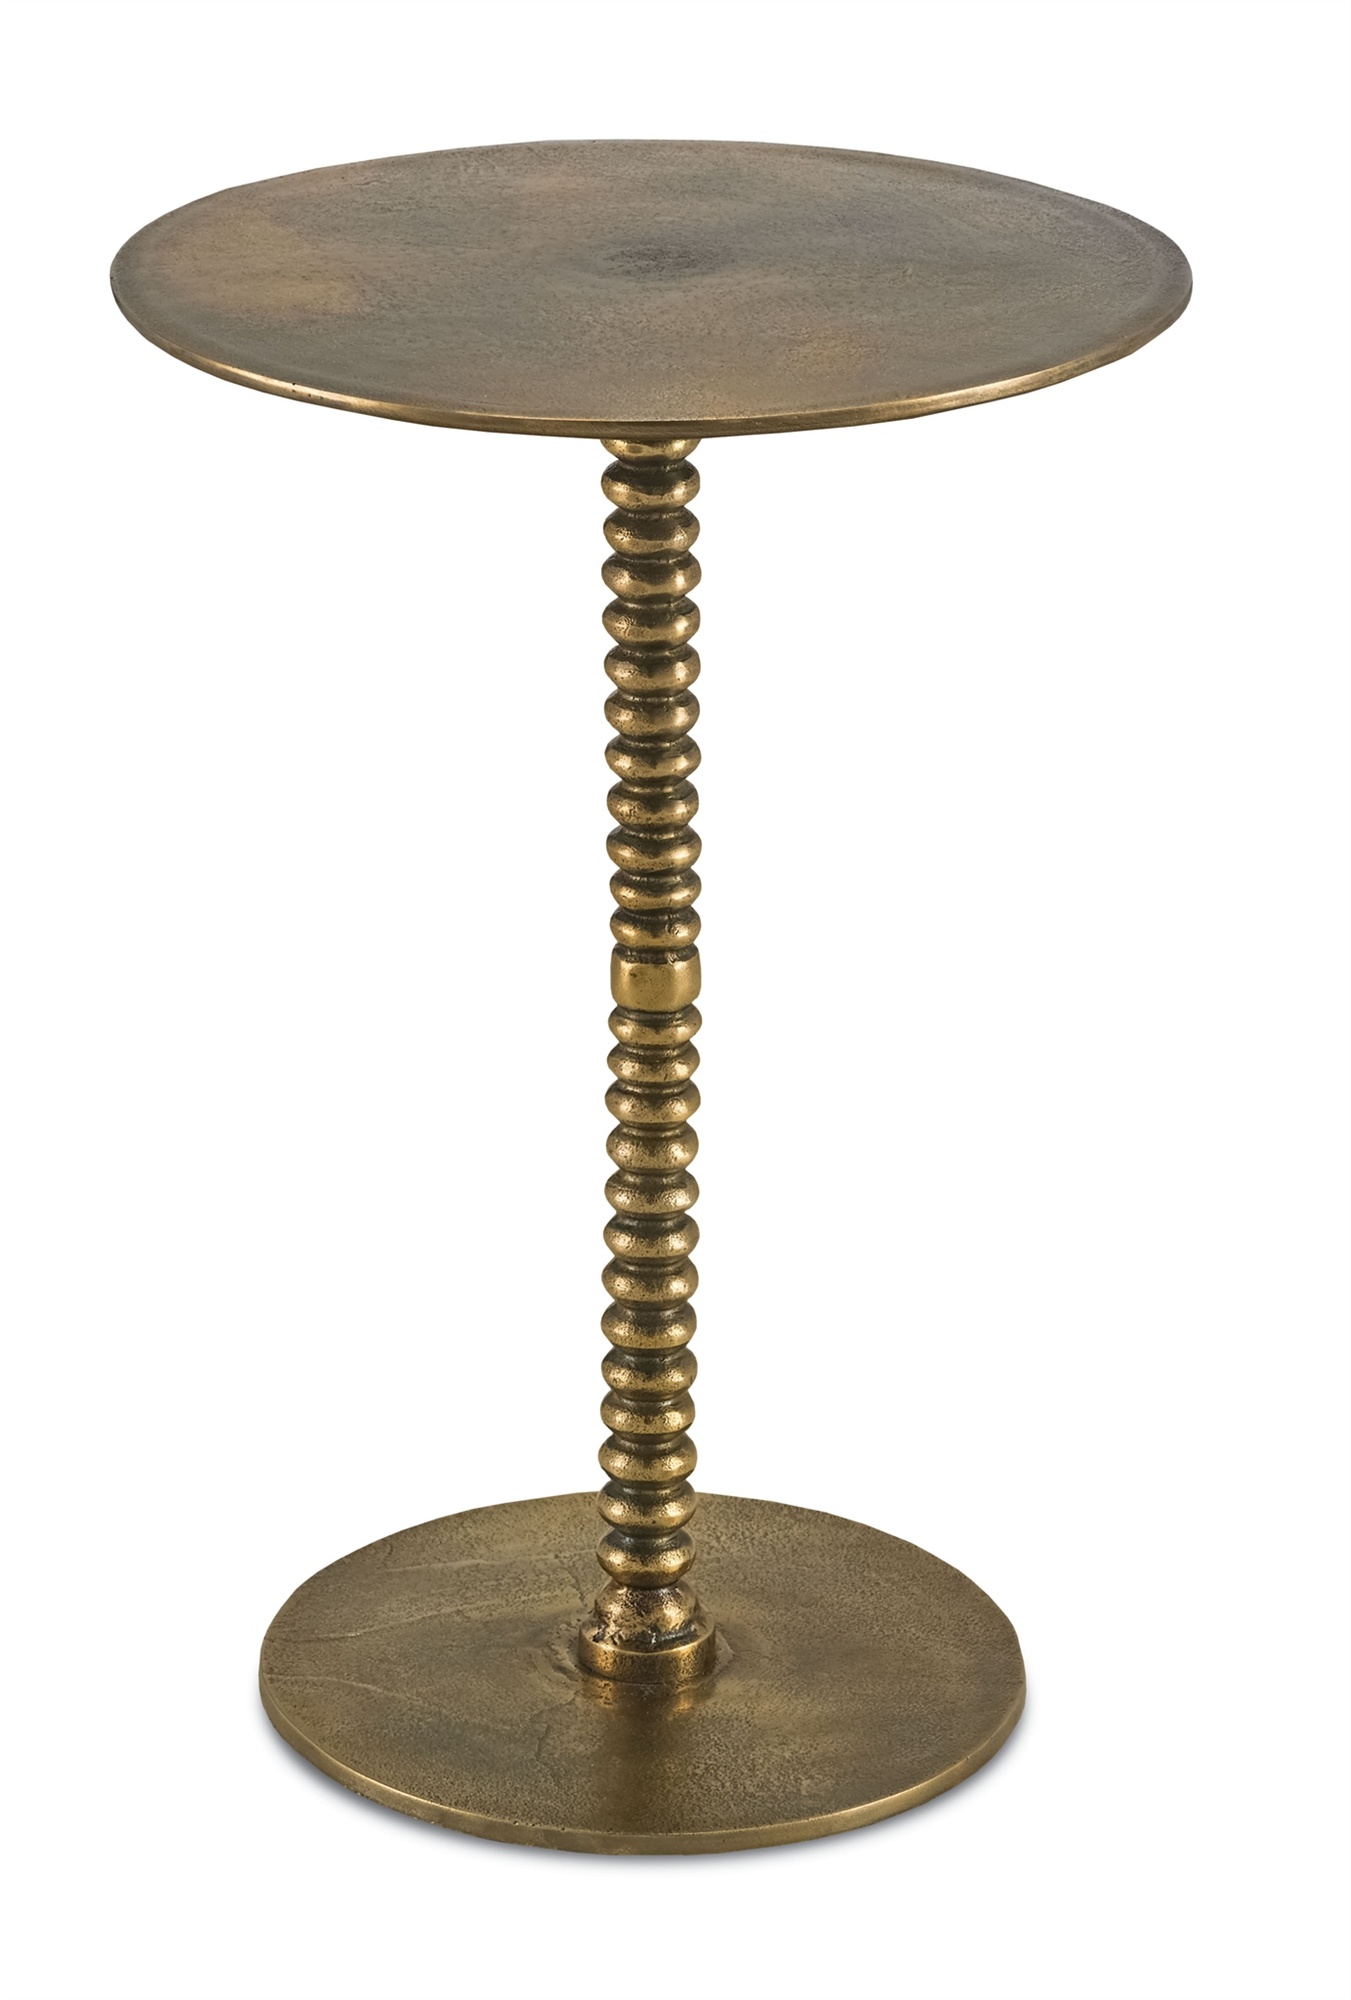 dasari accent table currey company round bronze christmas tablecloth and runner hexagon coffee gold legs ikea bedroom storage ideas white cube end wrought iron queen multi colored